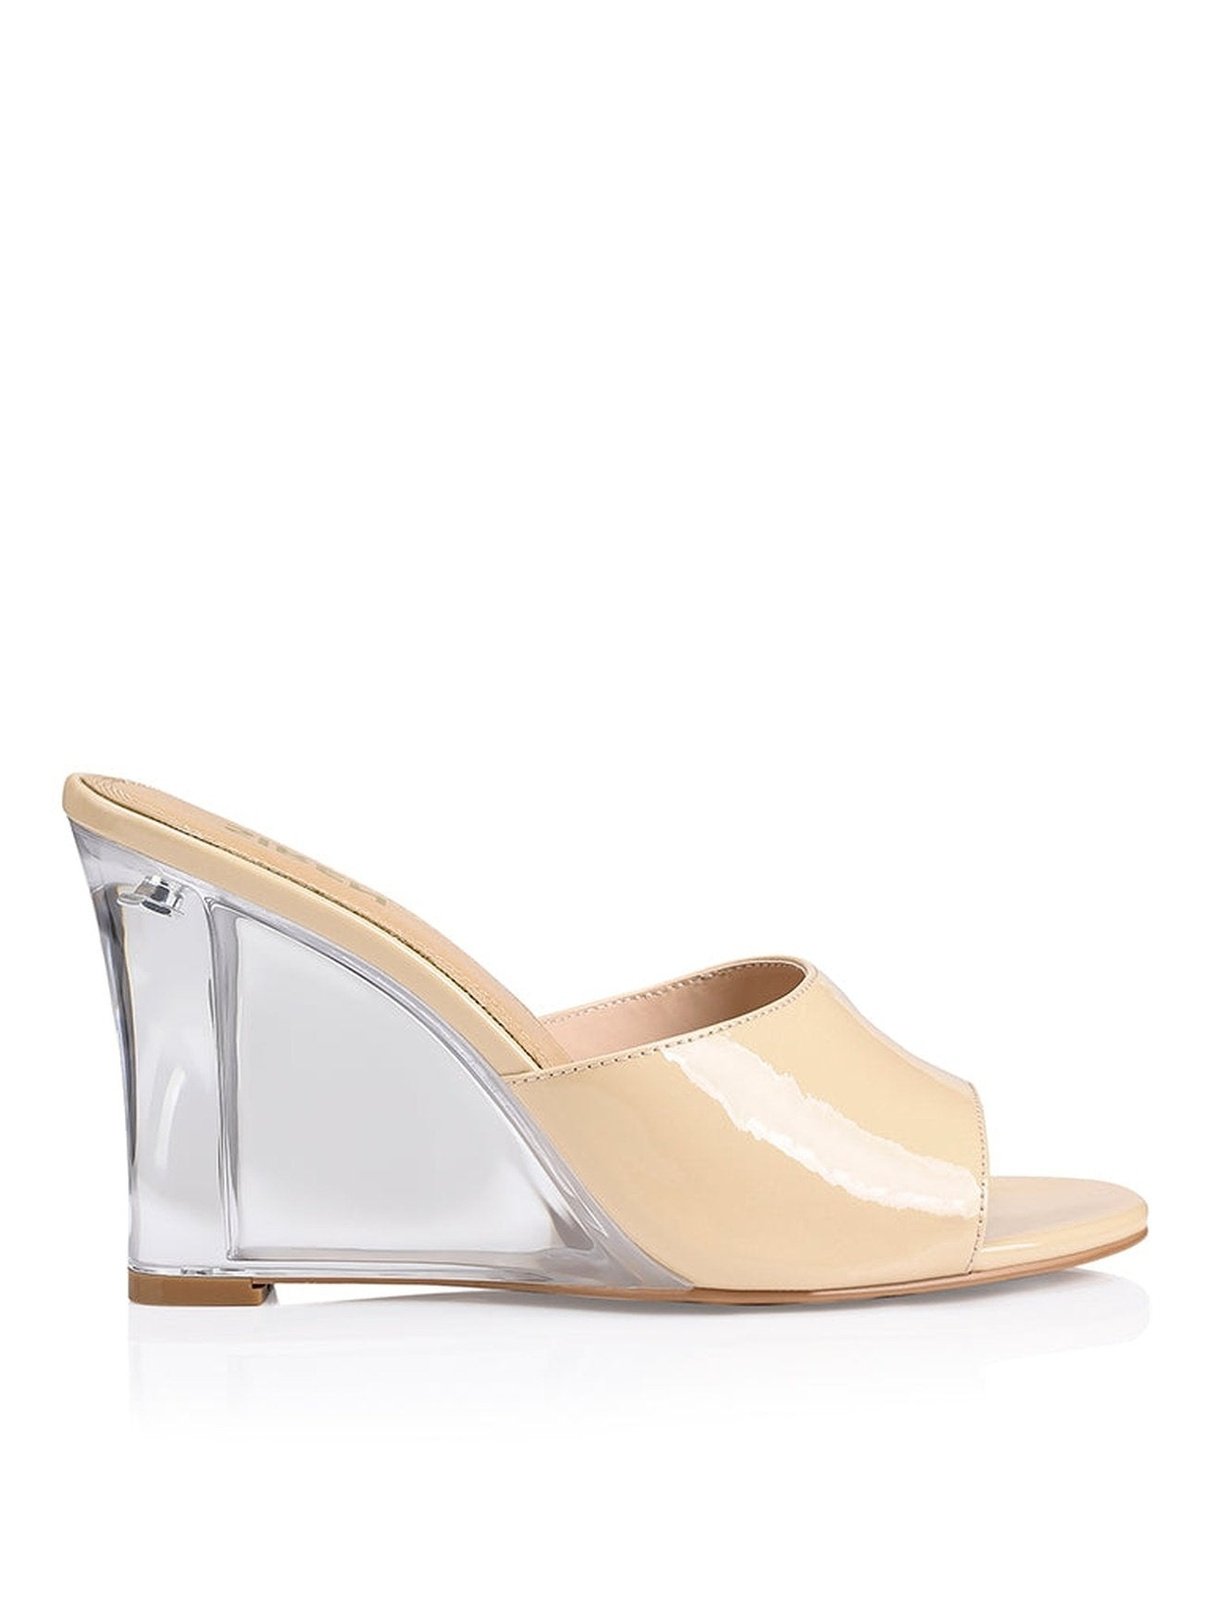 Bear Clear Wedge Heels - Nude Patent